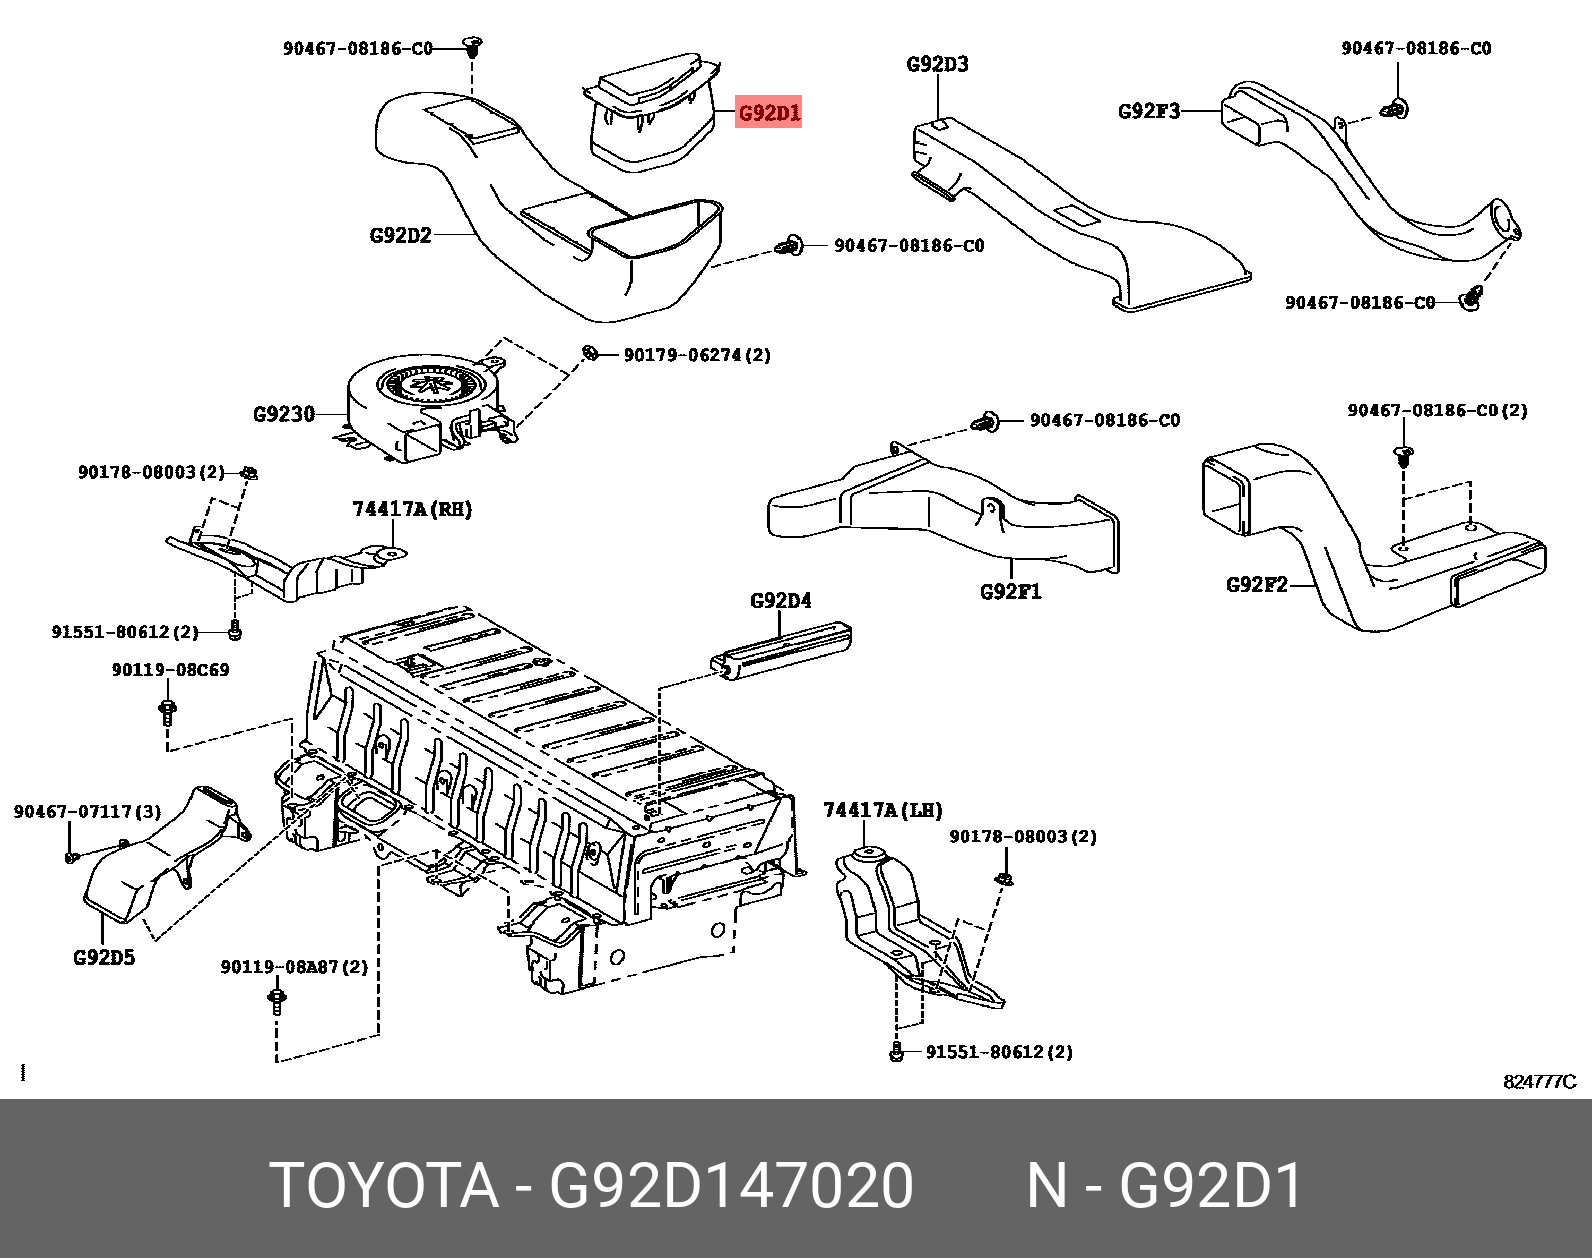 PRIUS (PLUG-IN) LEASE 200912 - 201010, DUCT, HYBRID BATTERY INTAKE, NO.1